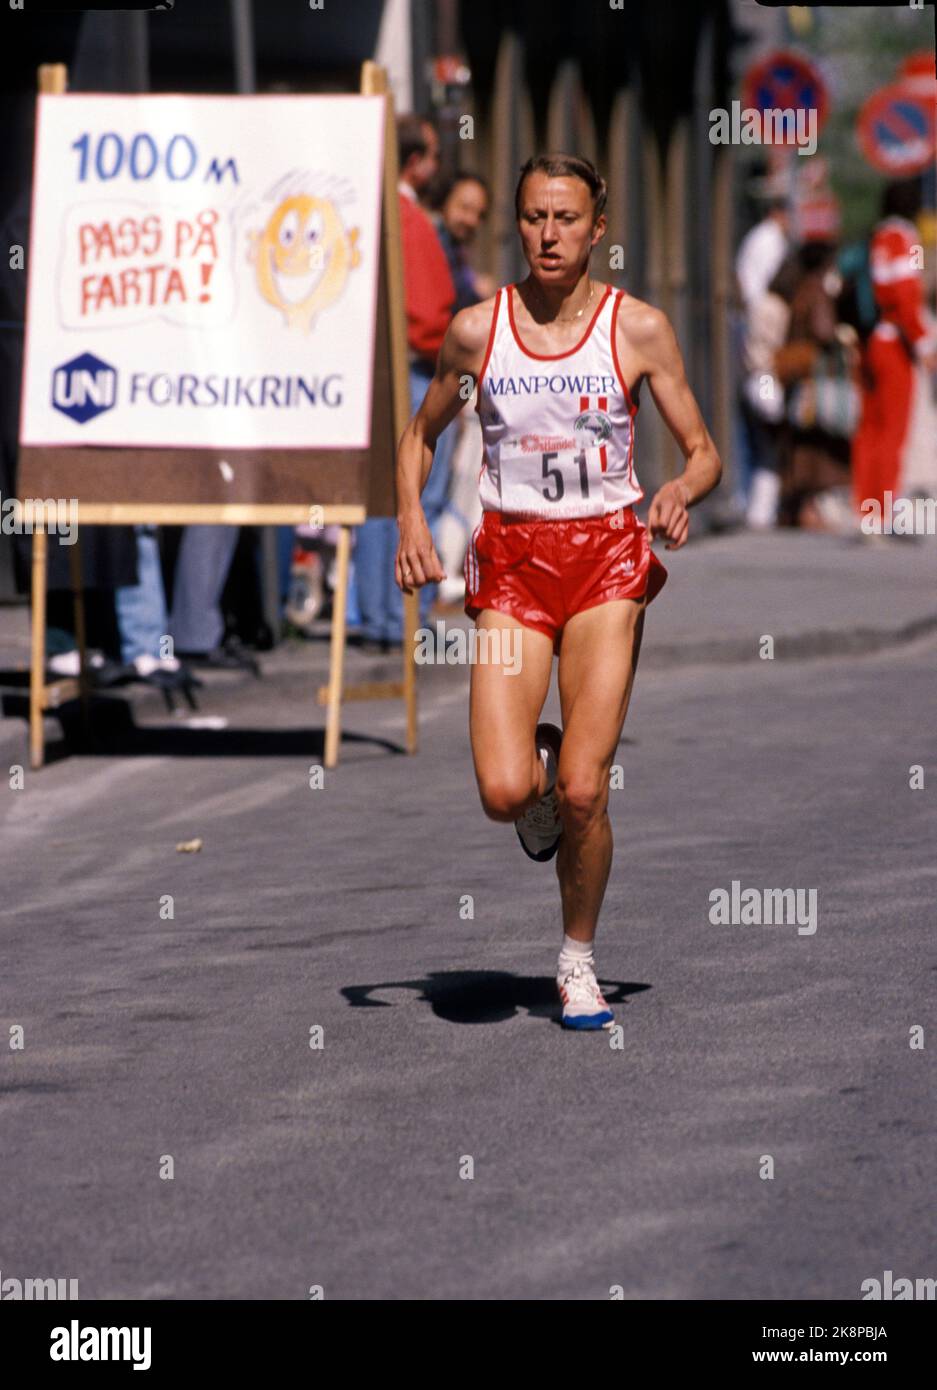 Oslo 19890430 Grete Waitz in action in the center race. Advertising for Uni Forsikring in the background. Photo: O. Olsen / NTB Stock Photo